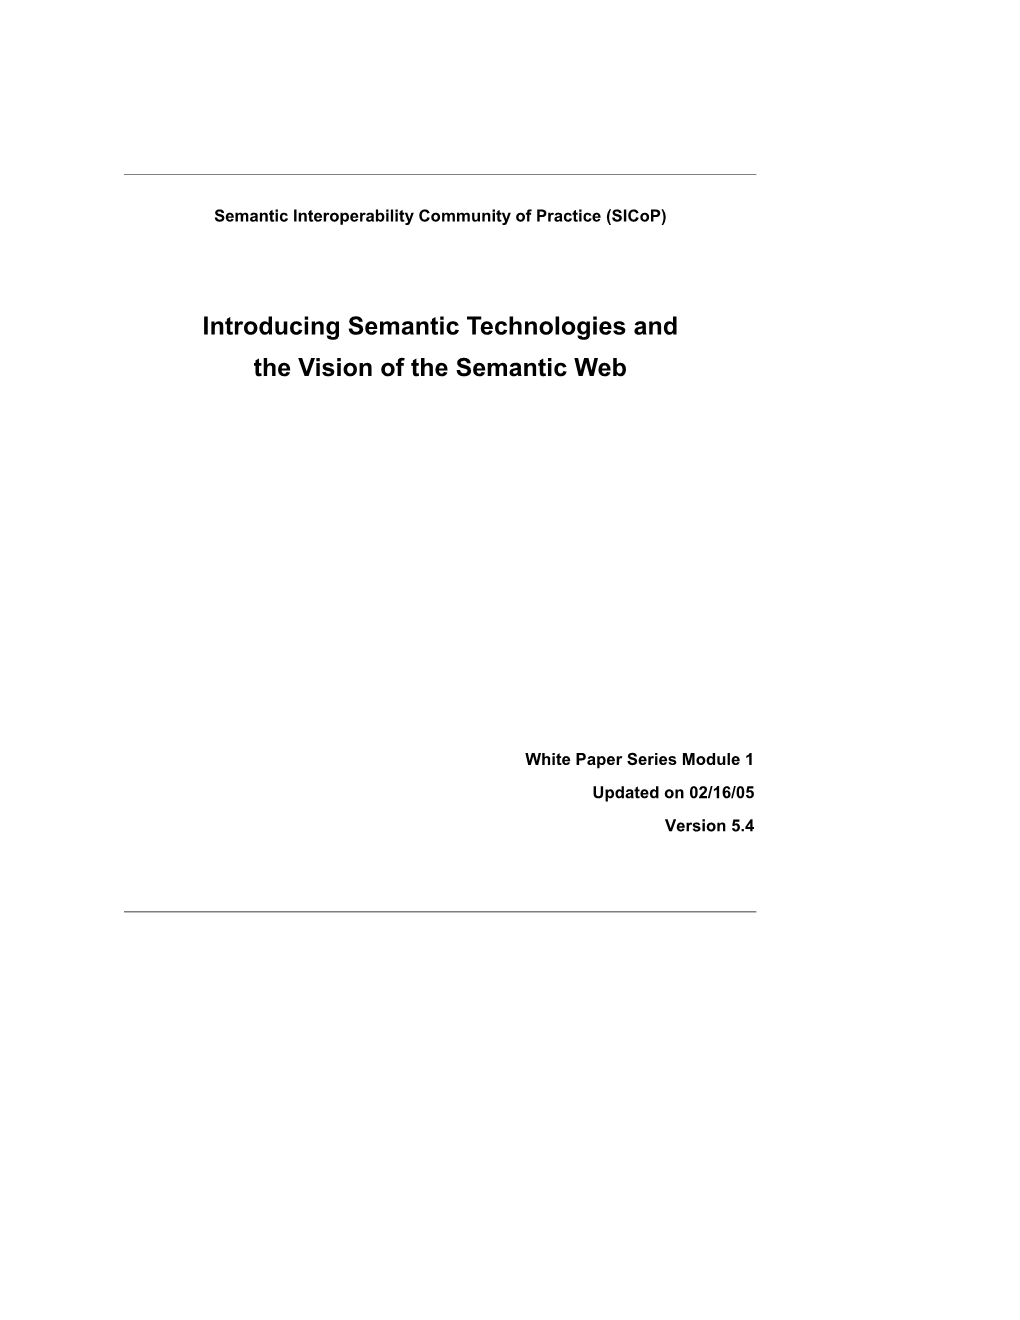 Introducing Semantic Technologies and the Vision of the Semantic Web